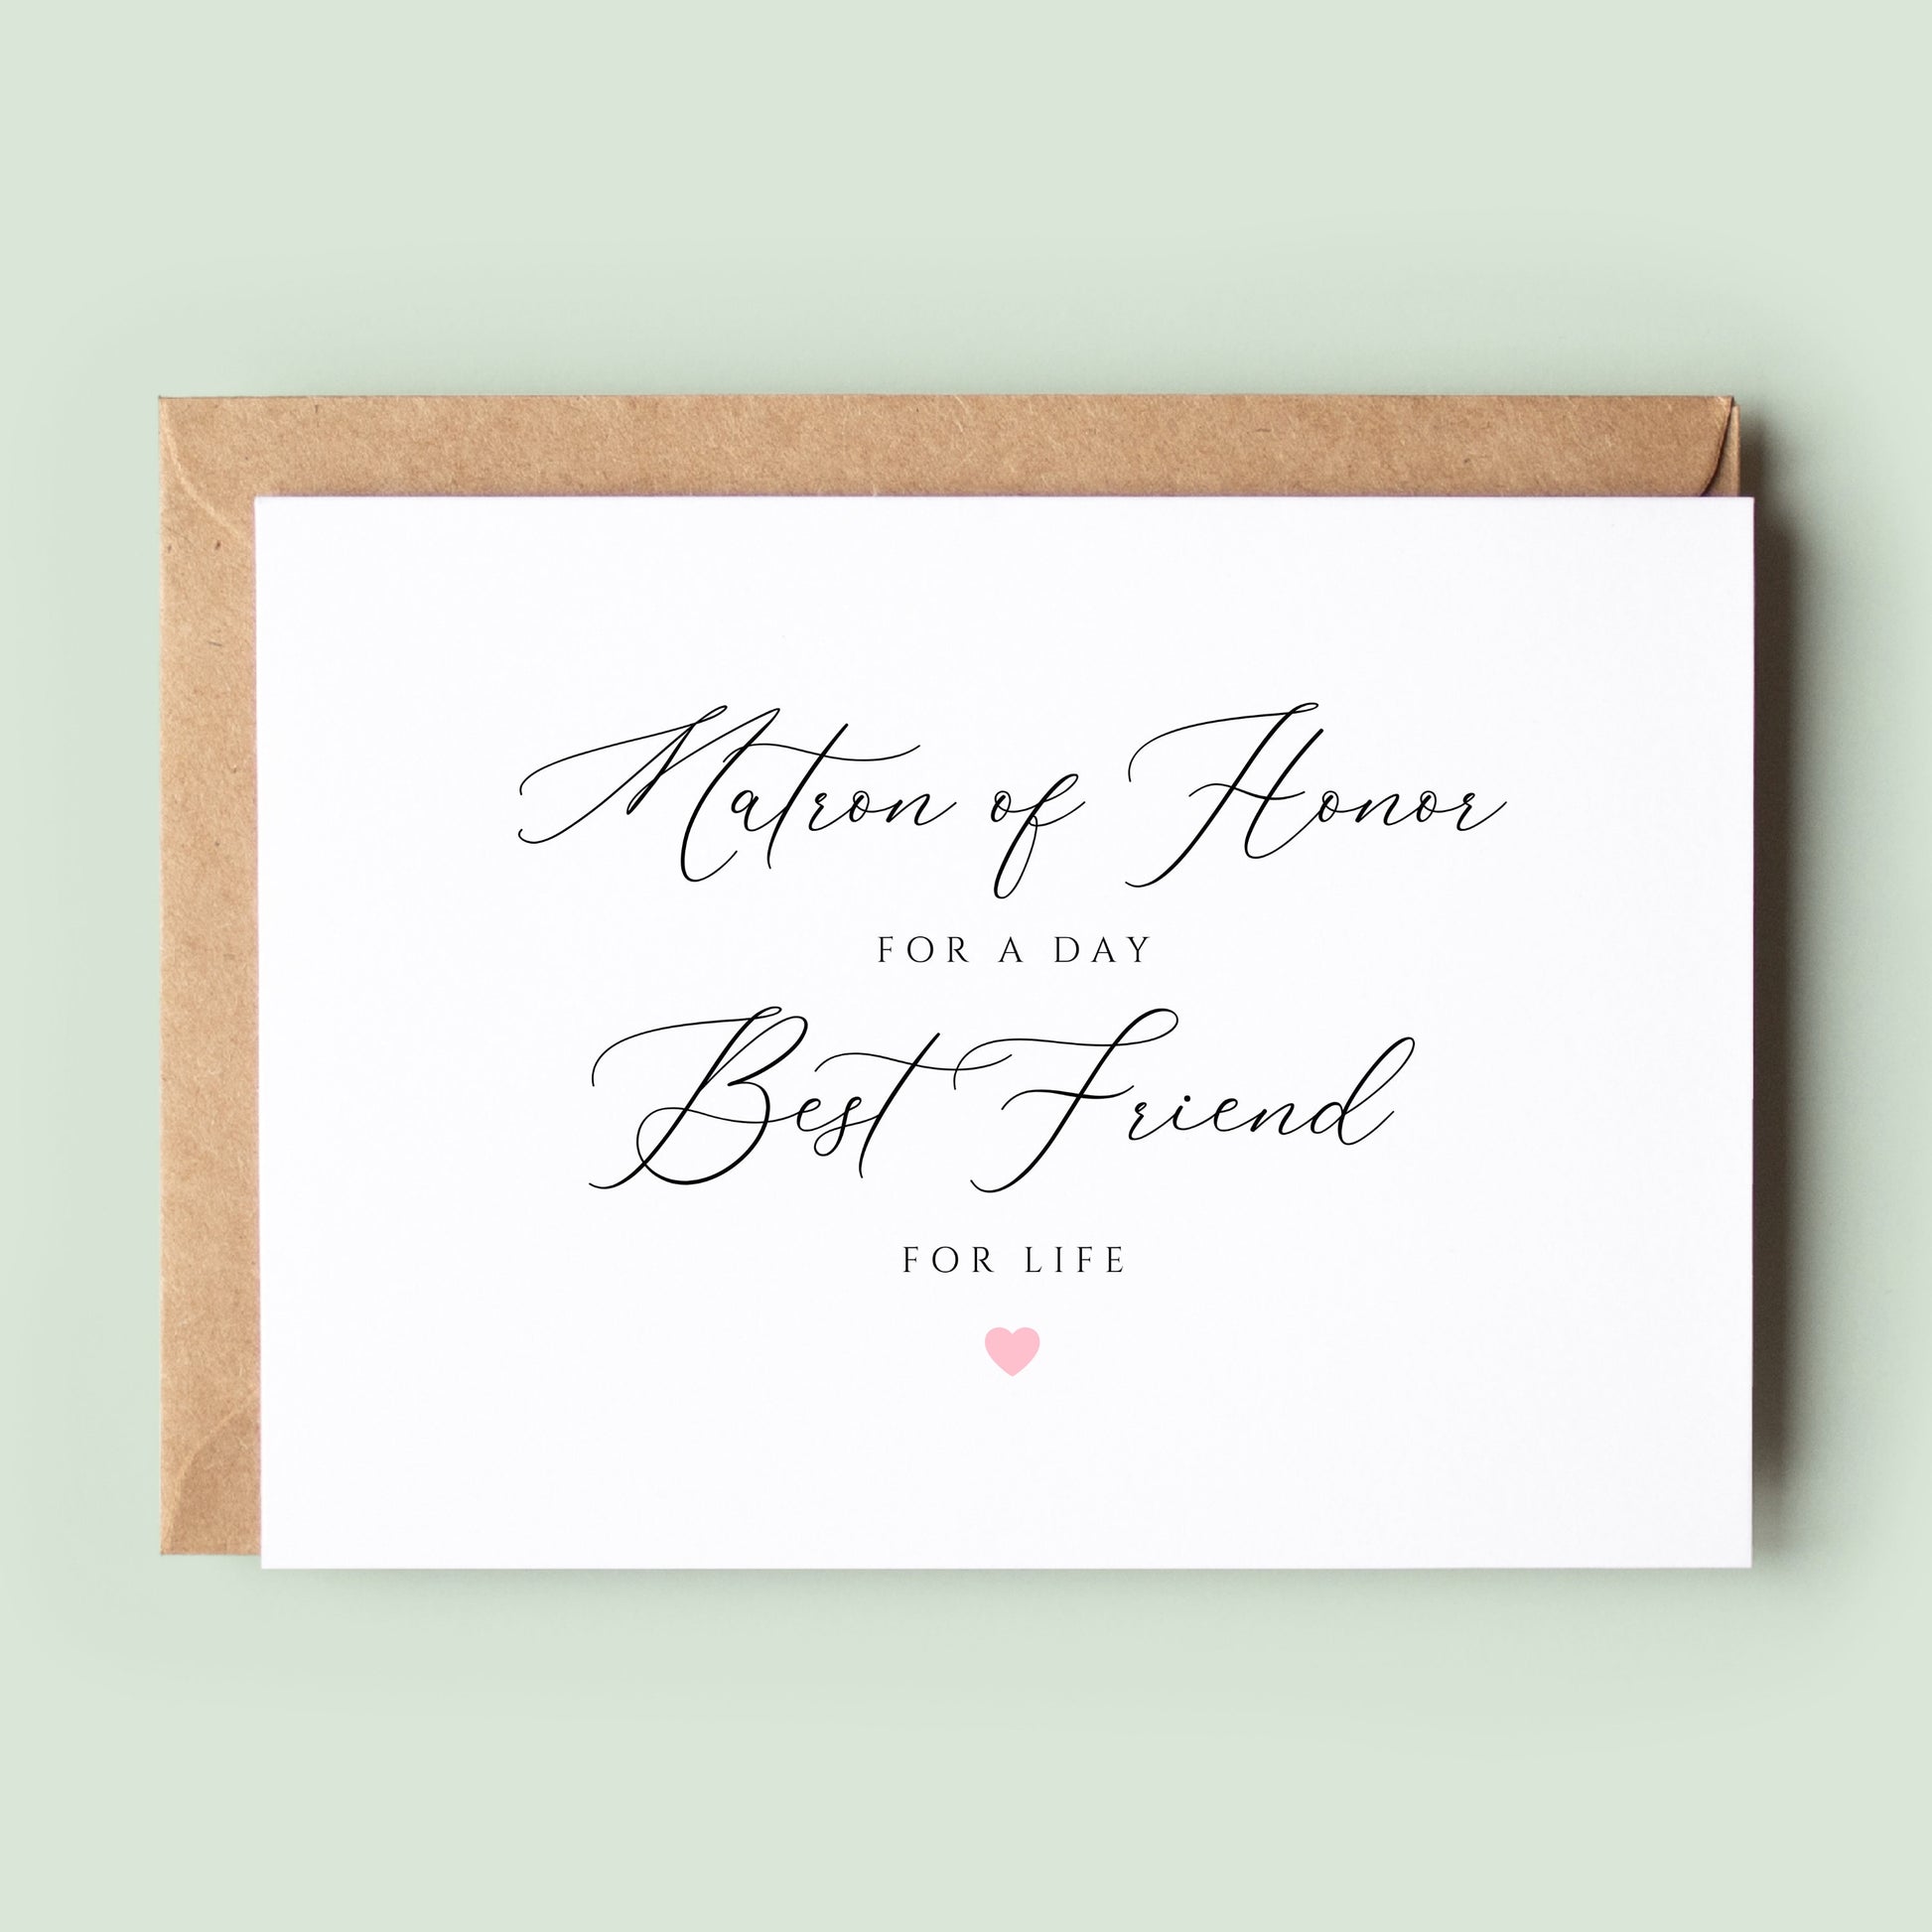 Maid of Honor for a Day, Best Friend for Life, Will You Be My Maid of Honor, Maid of Honor Proposal Card, Maid of Honor Proposal Box